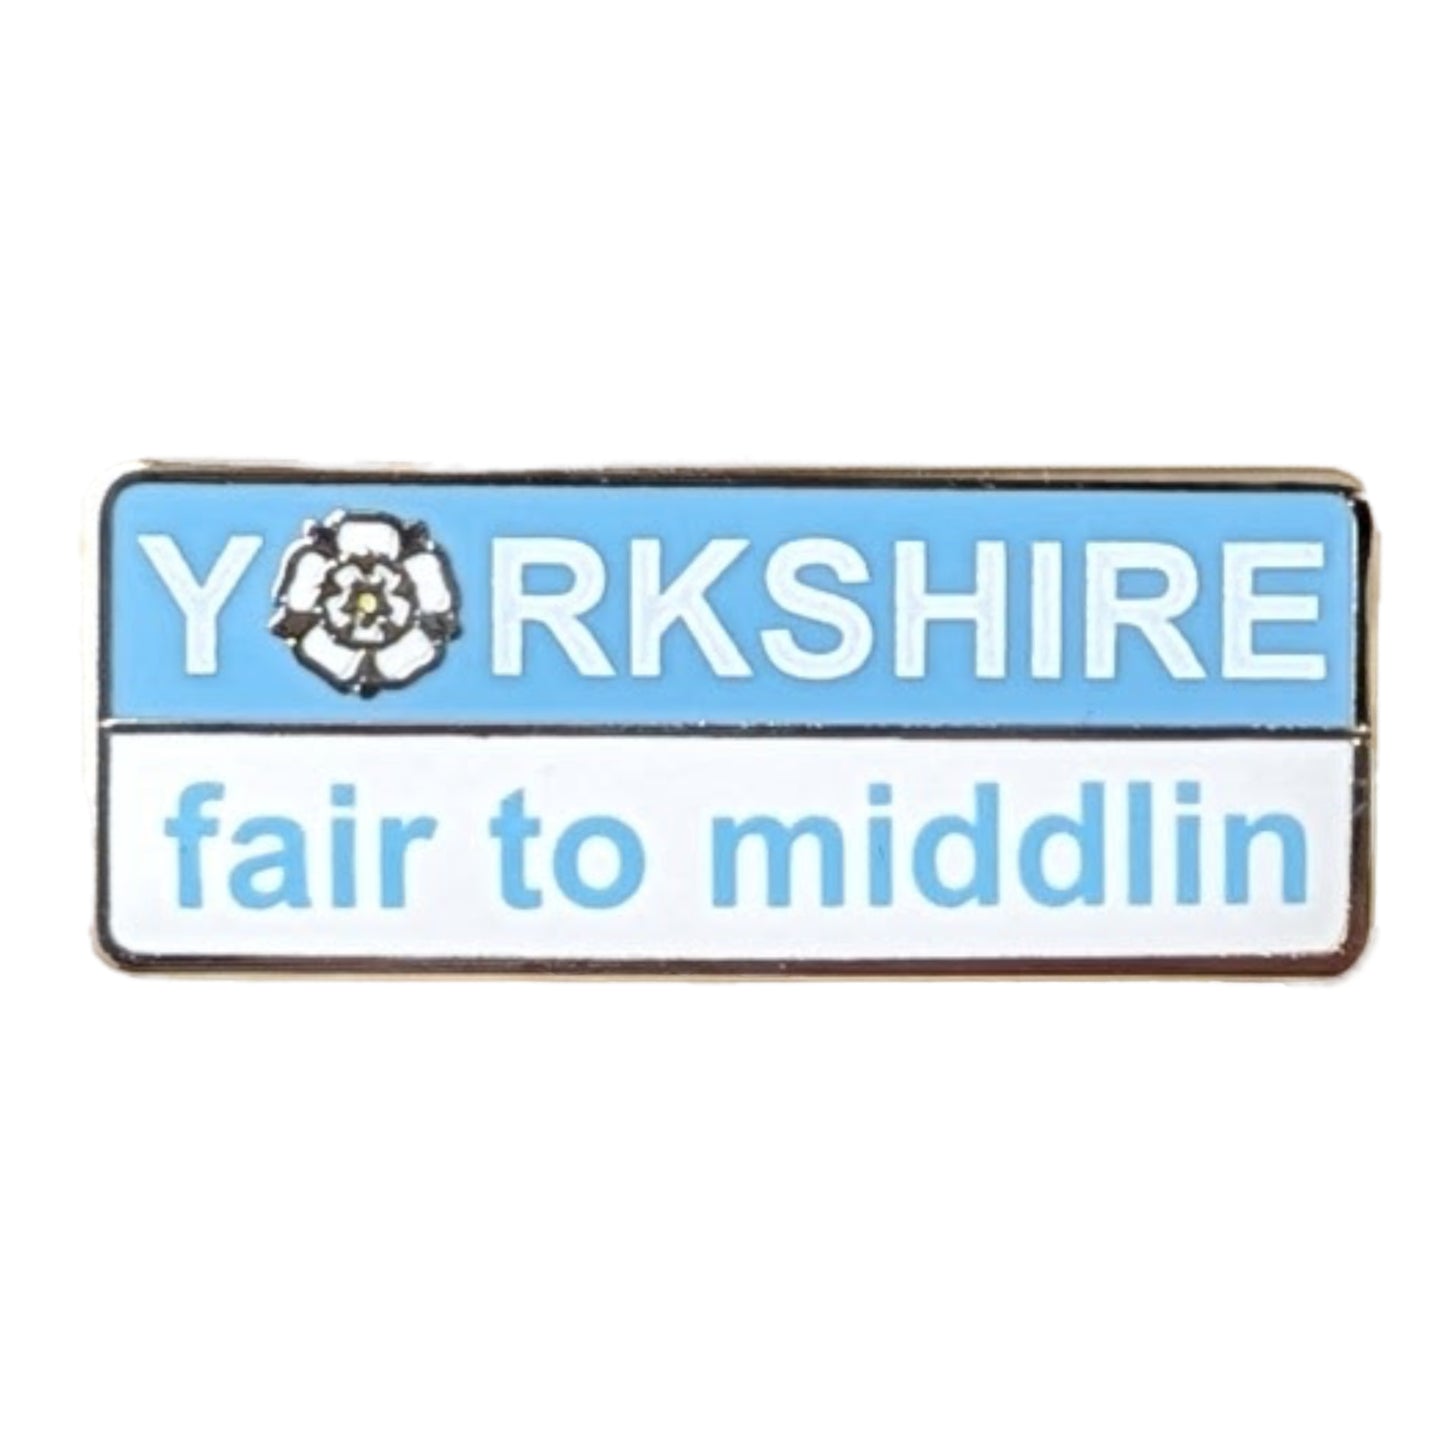 Fair to Middlin' Yorkshire Phrase Pin Badge - The Great Yorkshire Shop